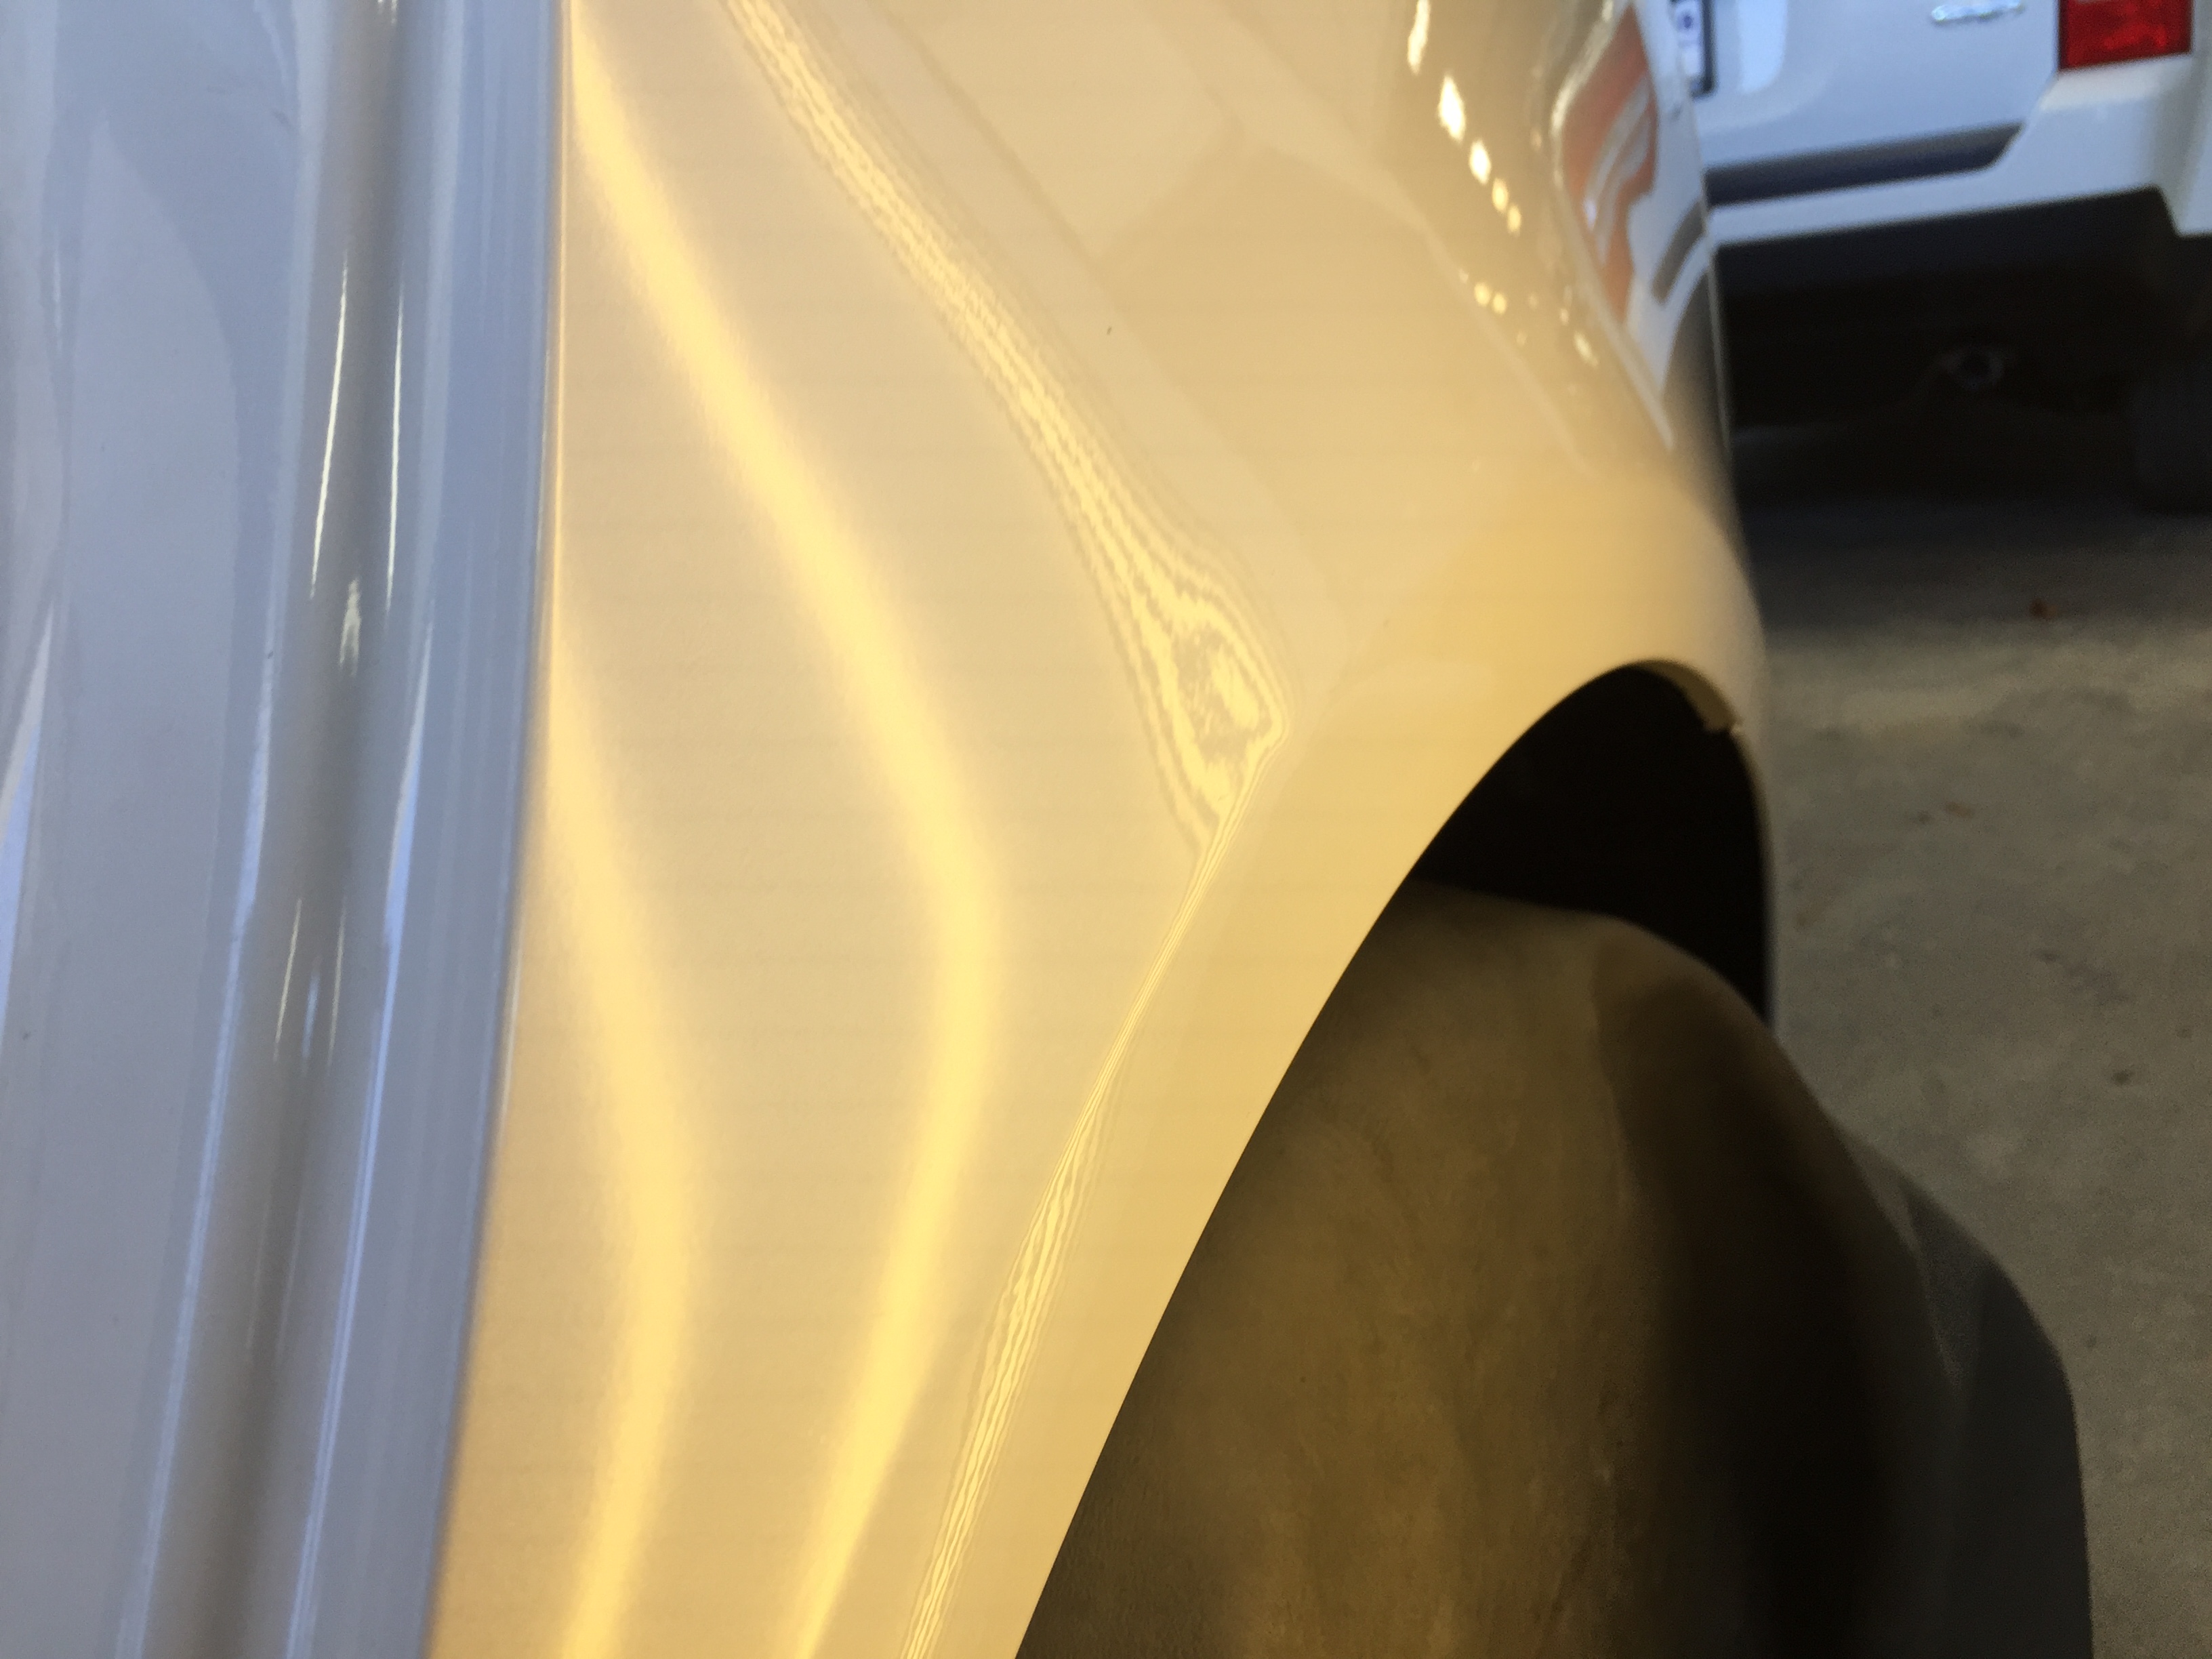 2016 Ford Fusion Dent Removal, Springfield, IL. http://217dent.com, Paintless Dent Repair Rear Quarter